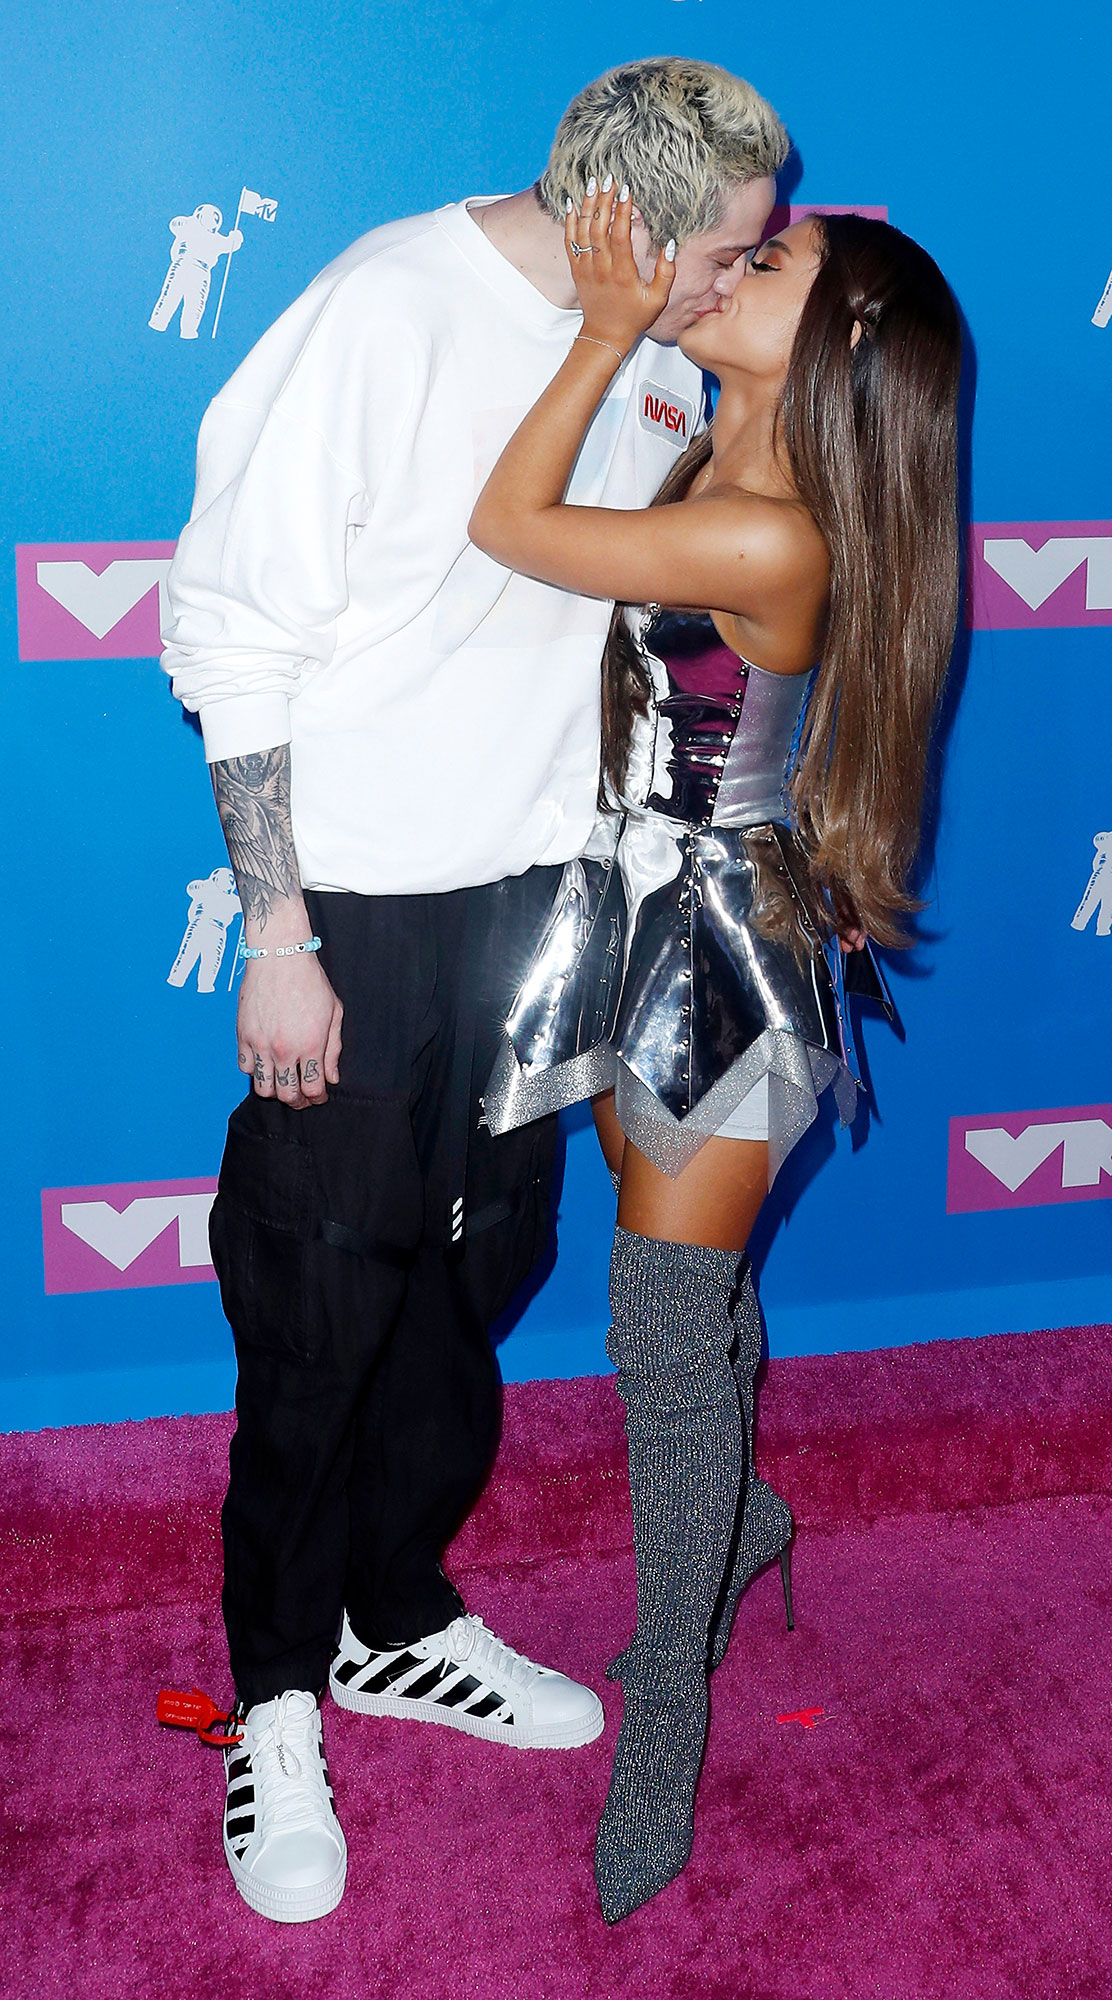 Pete Davidson and Ariana Grande MTV VMA Couples Who Made Red Carpet Debut